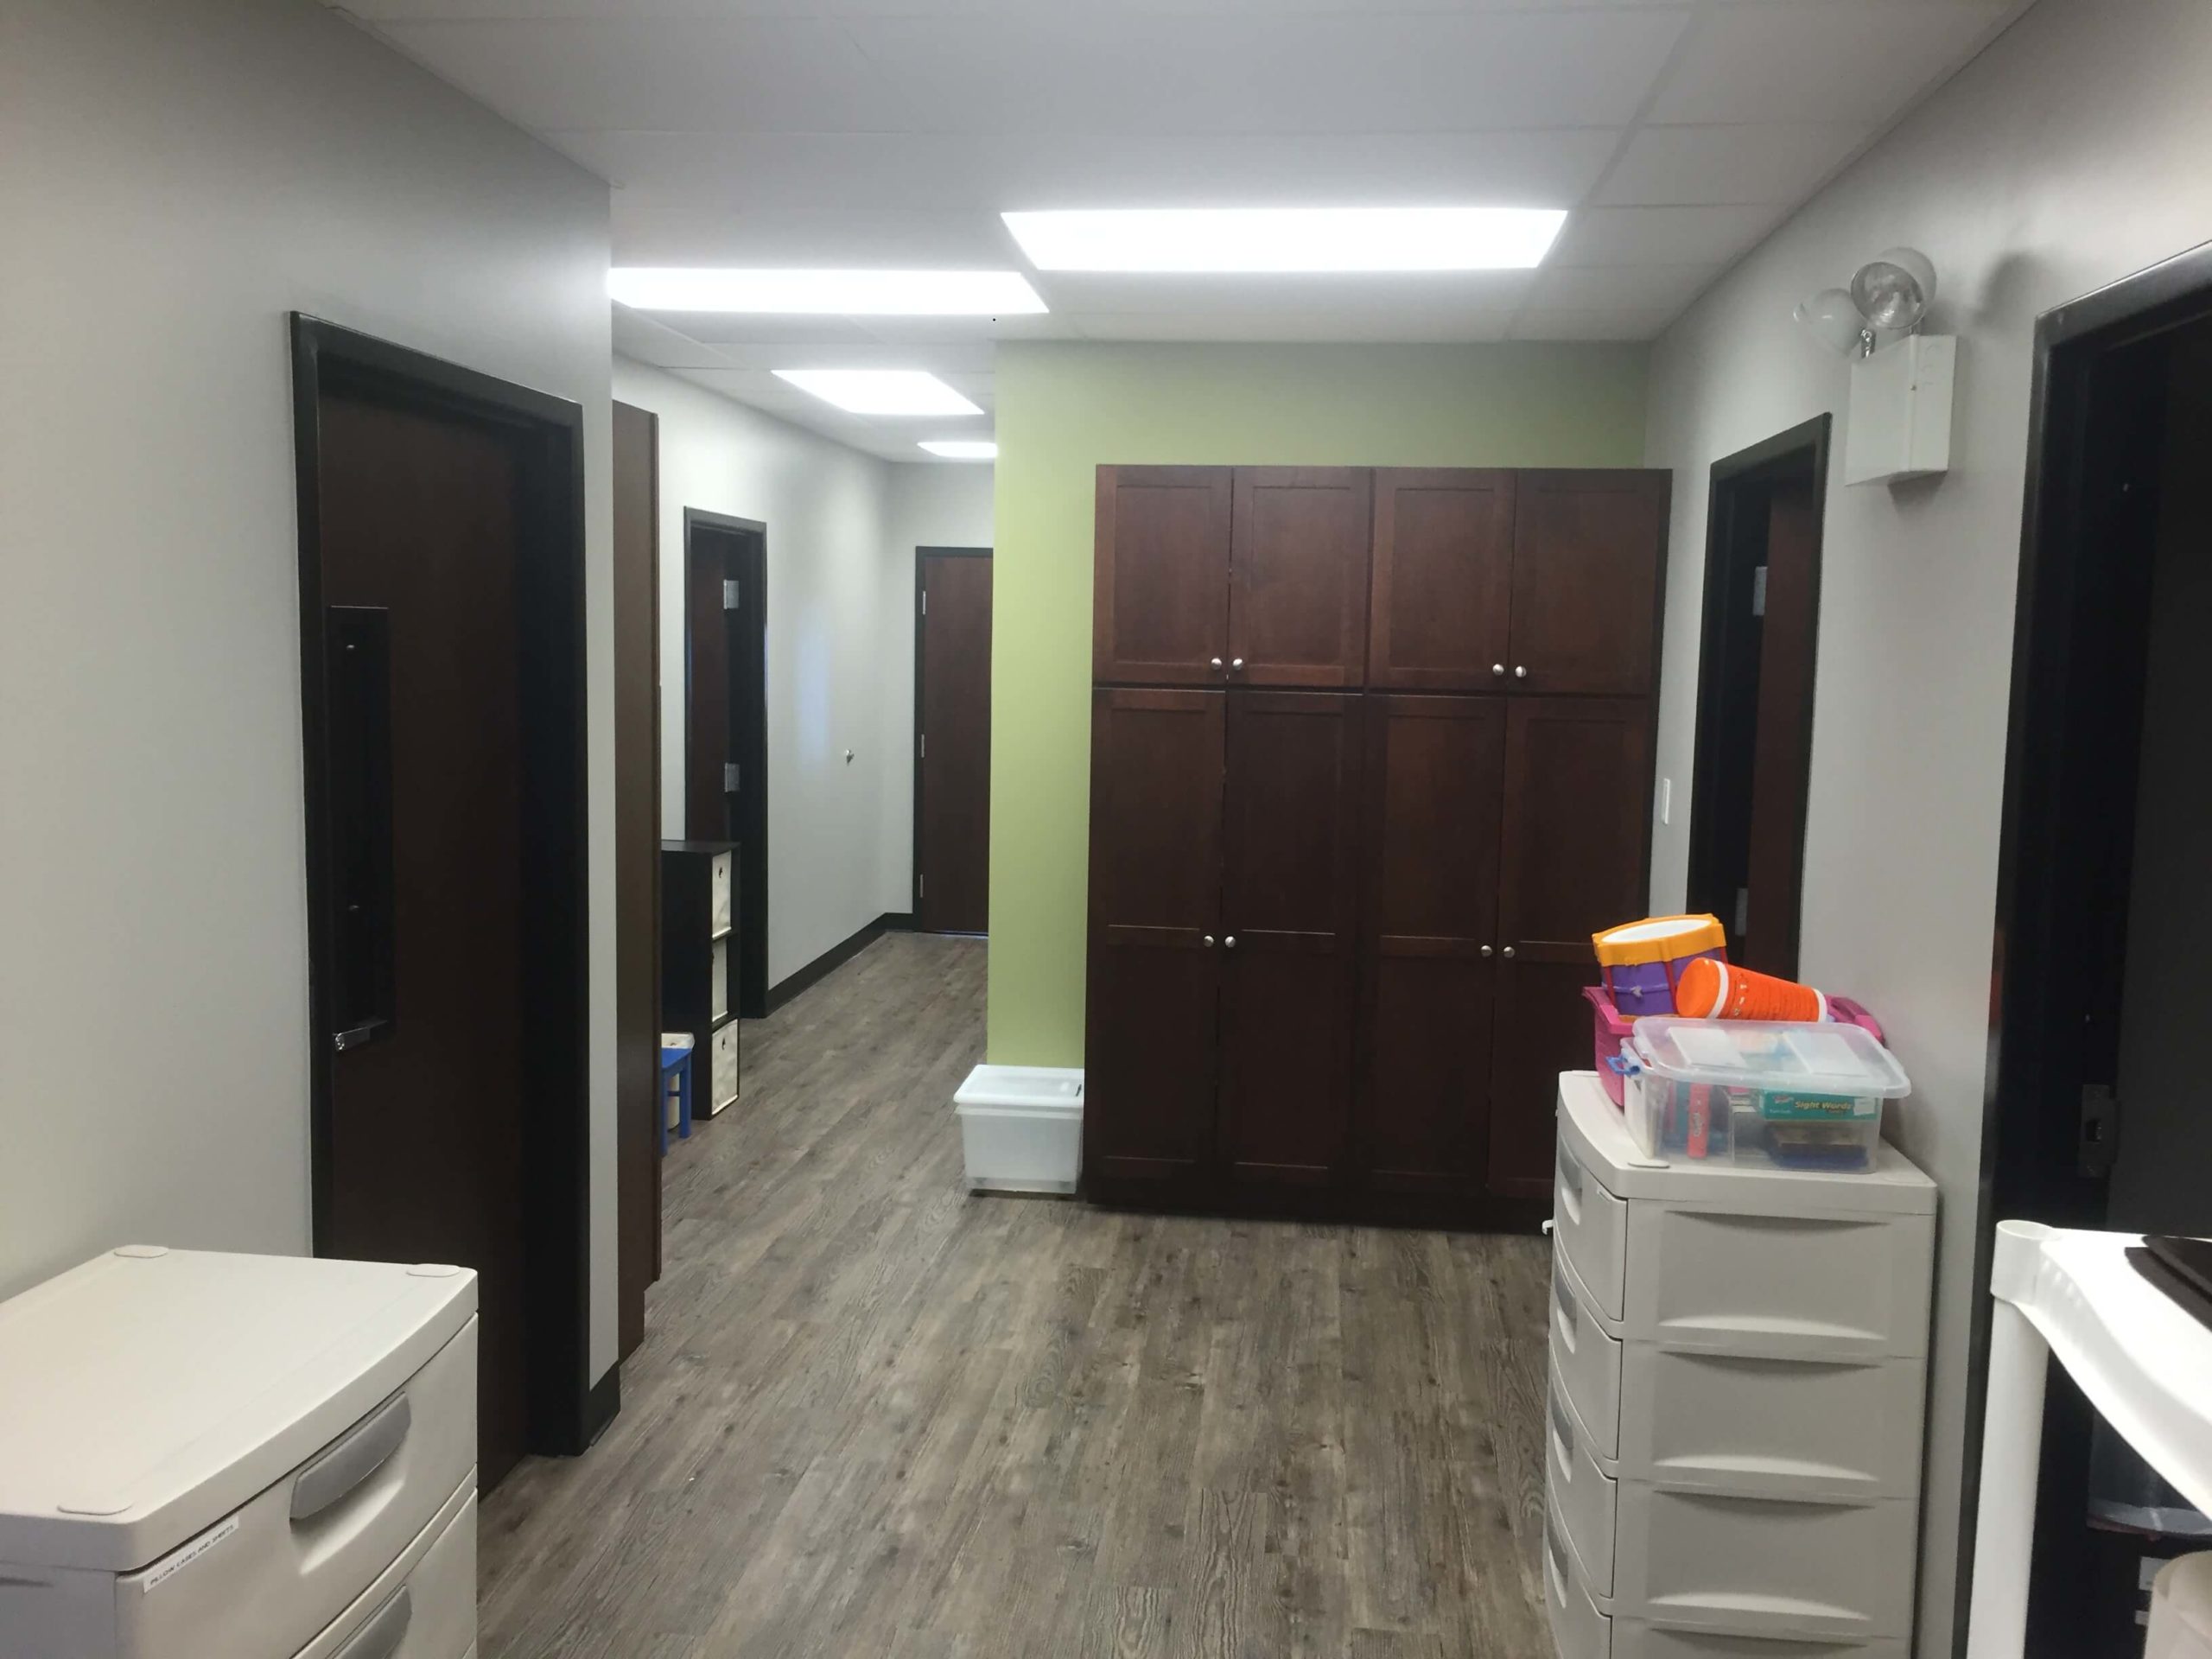 Speech Therapy rooms at Westside Children's Therapy in Joliet Illinois